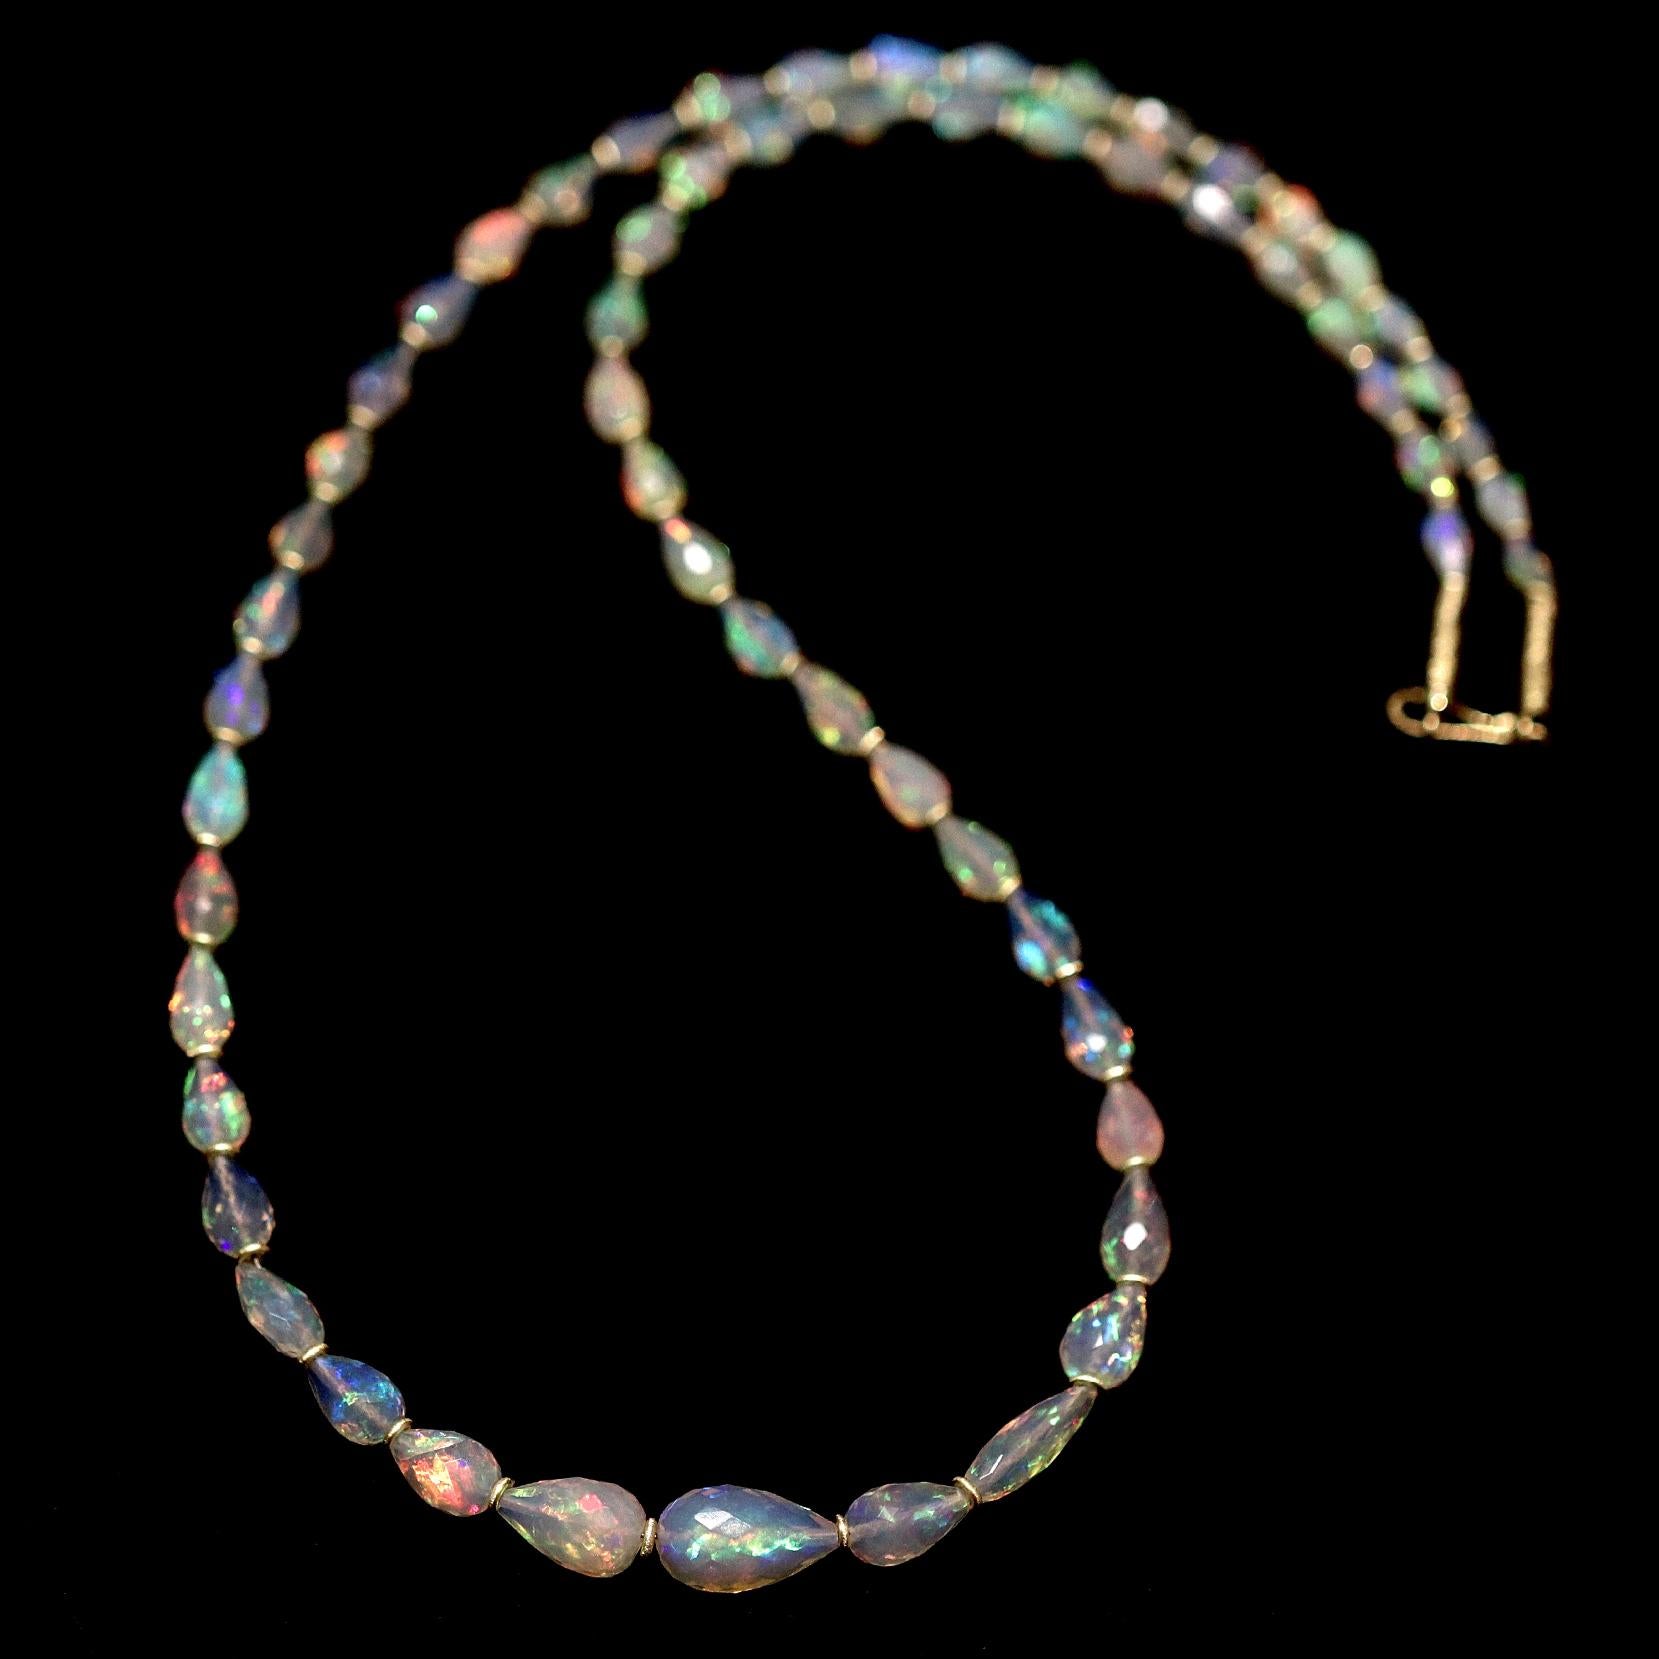 One of a Kind Fiery Faceted Opal Necklace hand-fabricated by acclaimed jewelry maker Petra Class featuring a spectacular array of white Ethiopian opals totaling 47.5 carats, glowing with rainbow fire, individually flanked by 22k yellow gold bead